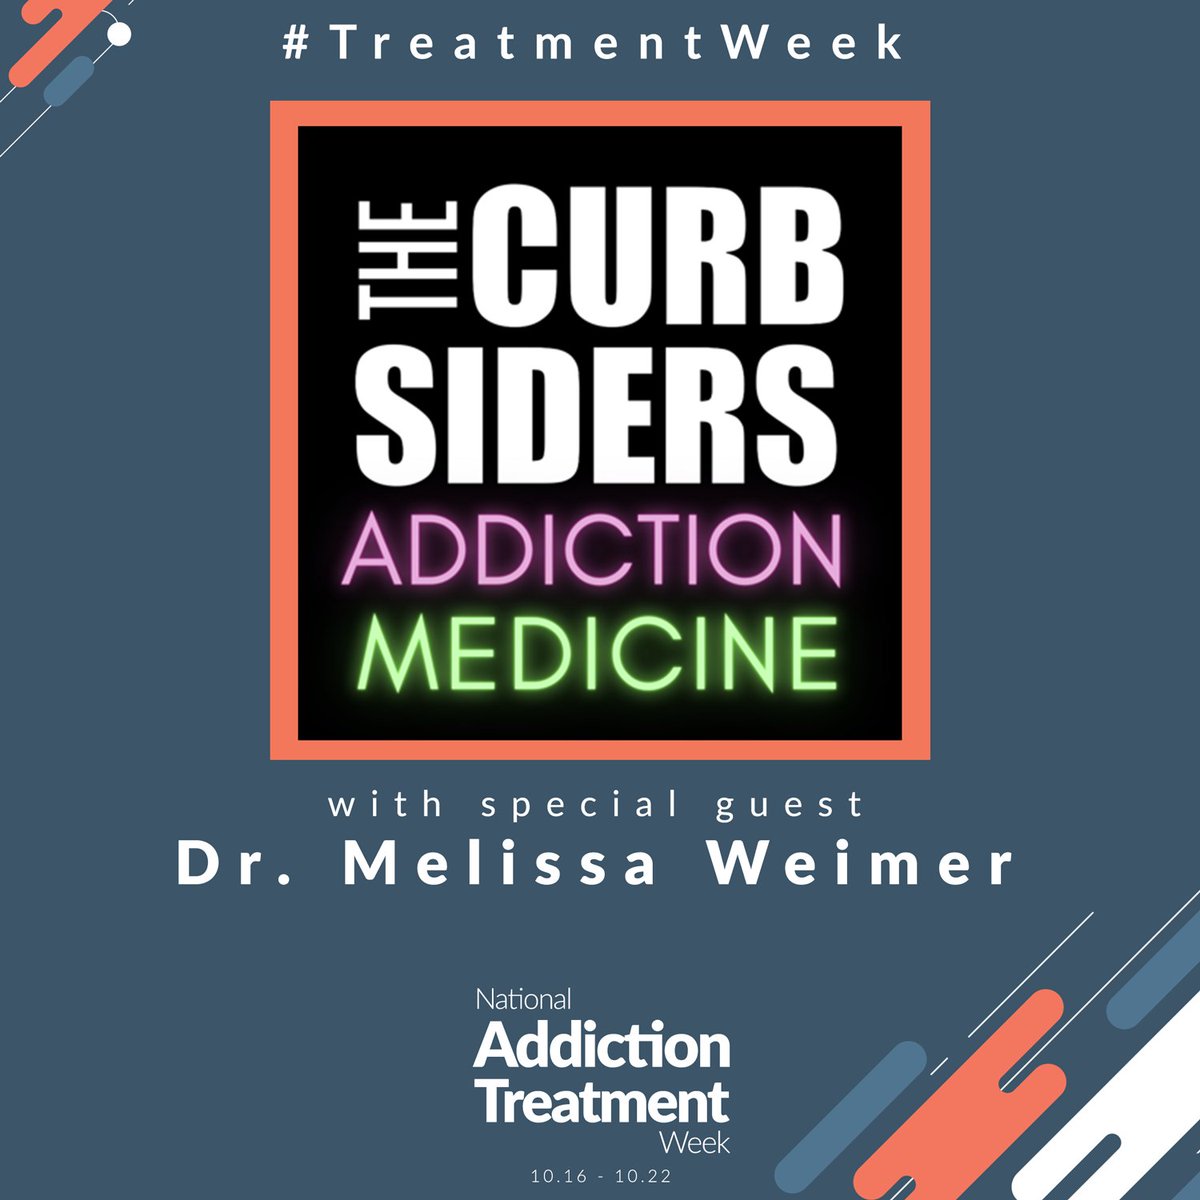 ASAM member Dr. Melissa Weimer stopped by the Curbsiders Internal Medicine Podcast to talk all things addiction medicine. Listen now >> open.spotify.com/show/78TGTjd1C… #CurbsidersPodcast #TreatmentWeek #EndStigma #NATW #AddictionMedicine #ASAM #TreatAddictionSaveLives